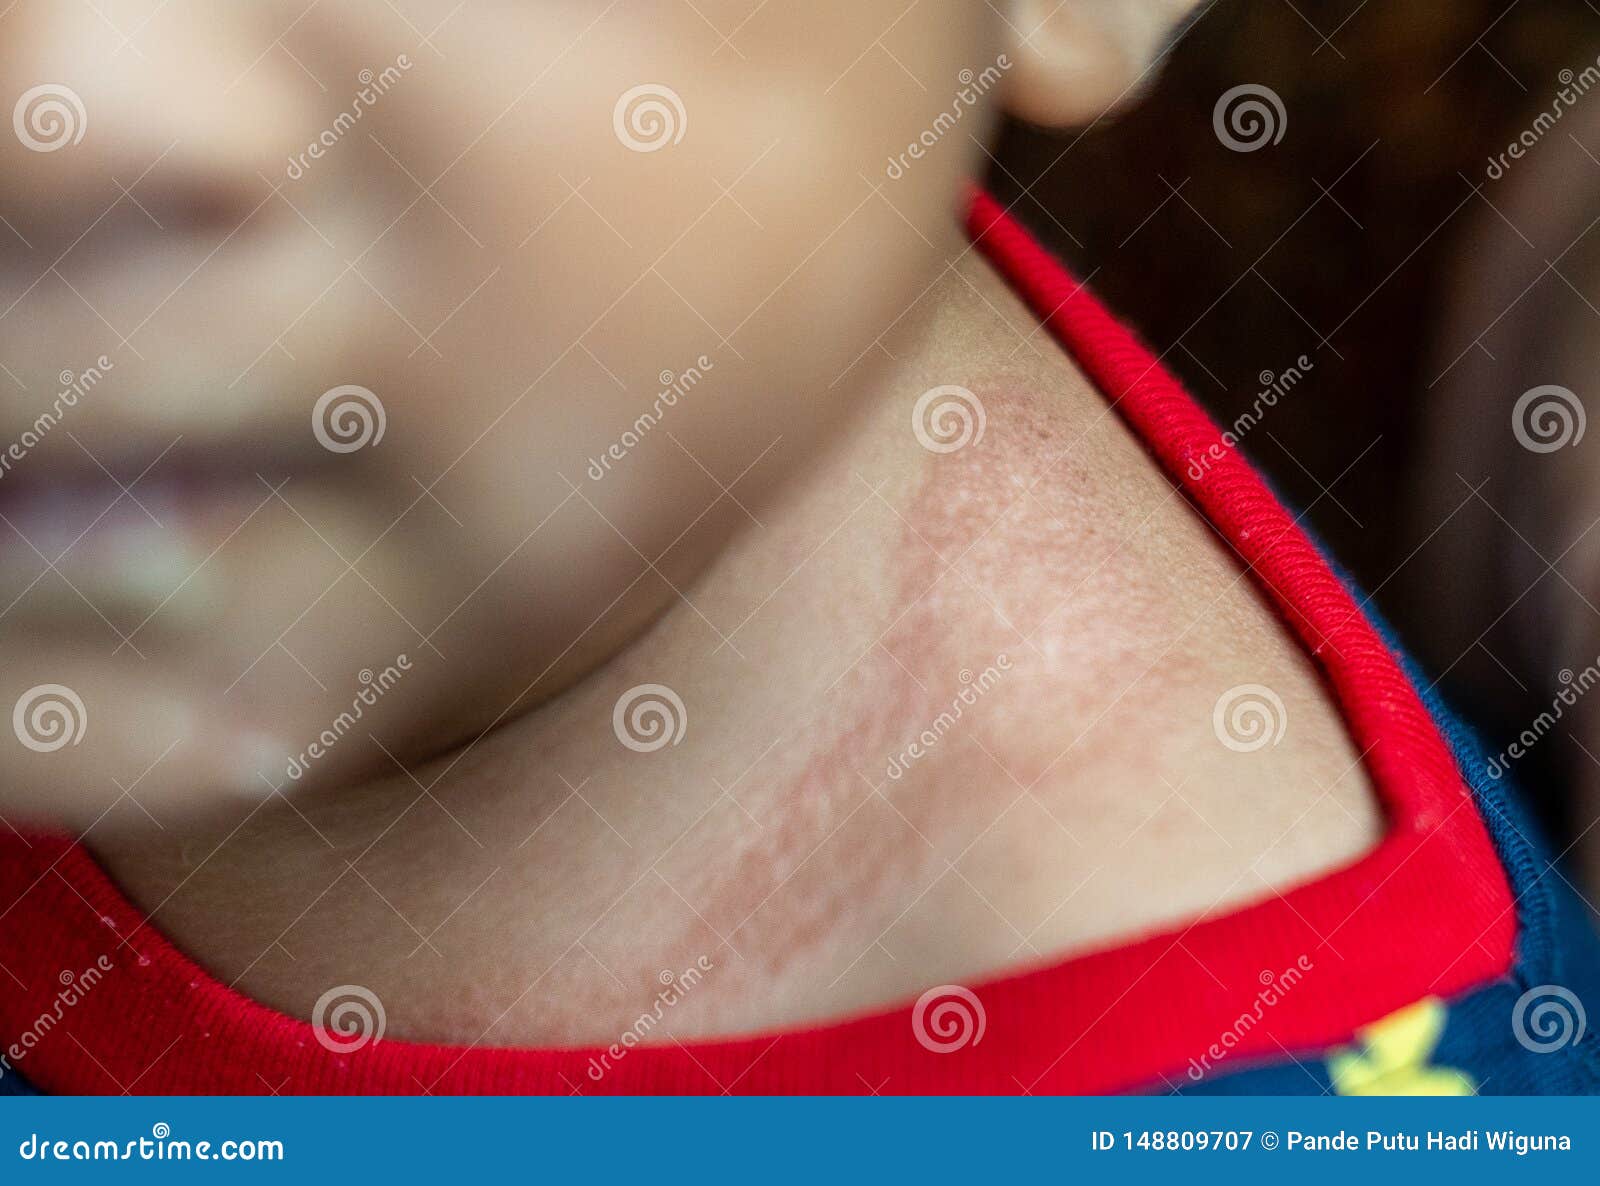 eczema can show up as red, crusty patches on your baby`s skin, often during their first few months. itÃ¢â¬â¢s common and very